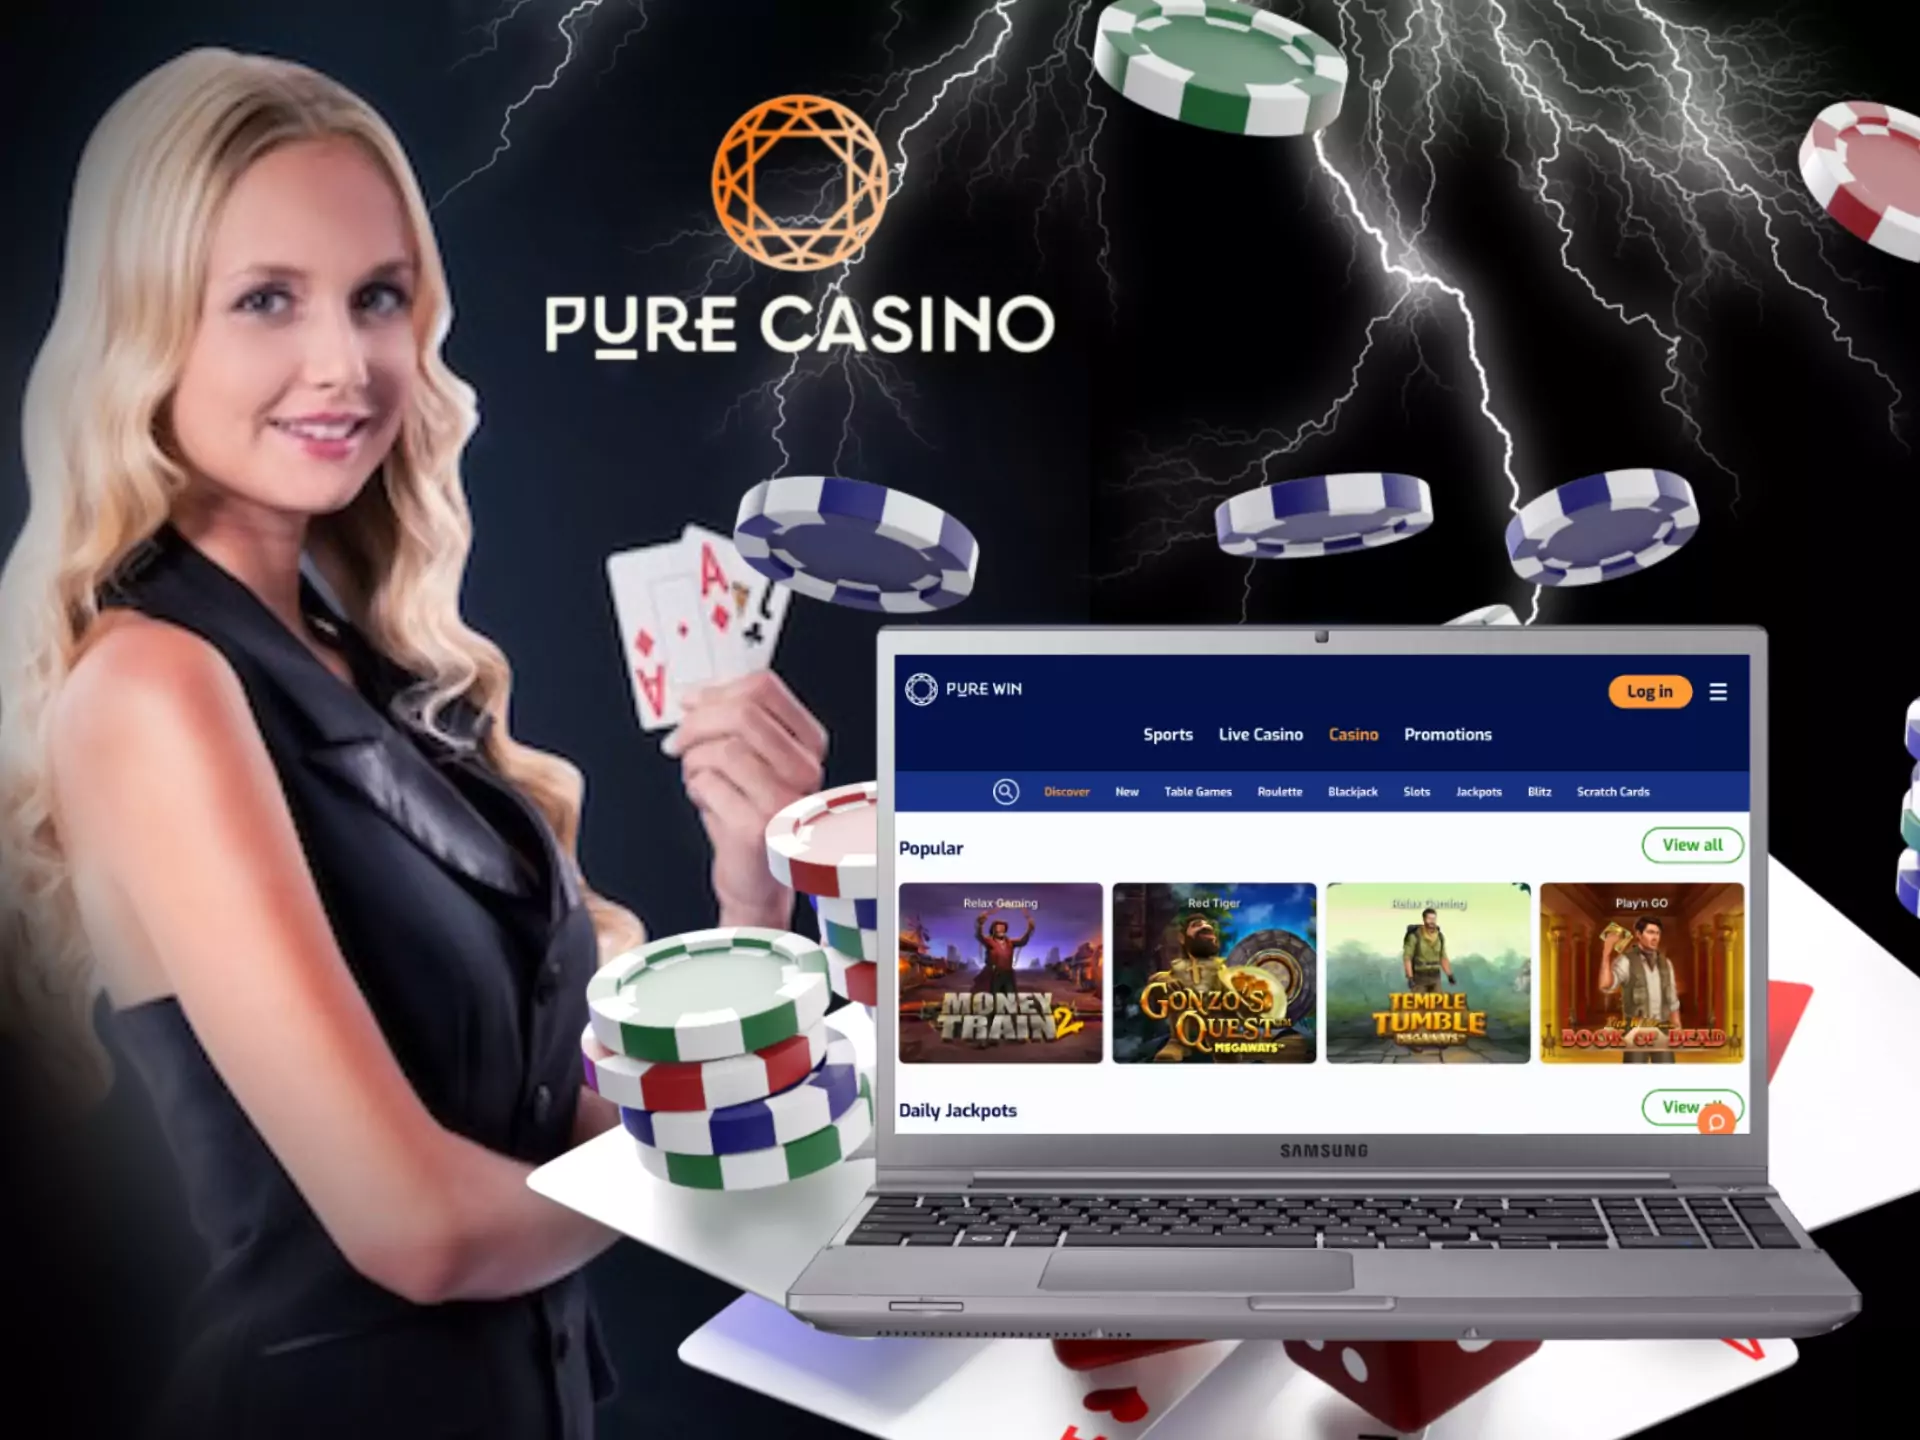 There are a lot of casino games at Pure Win.